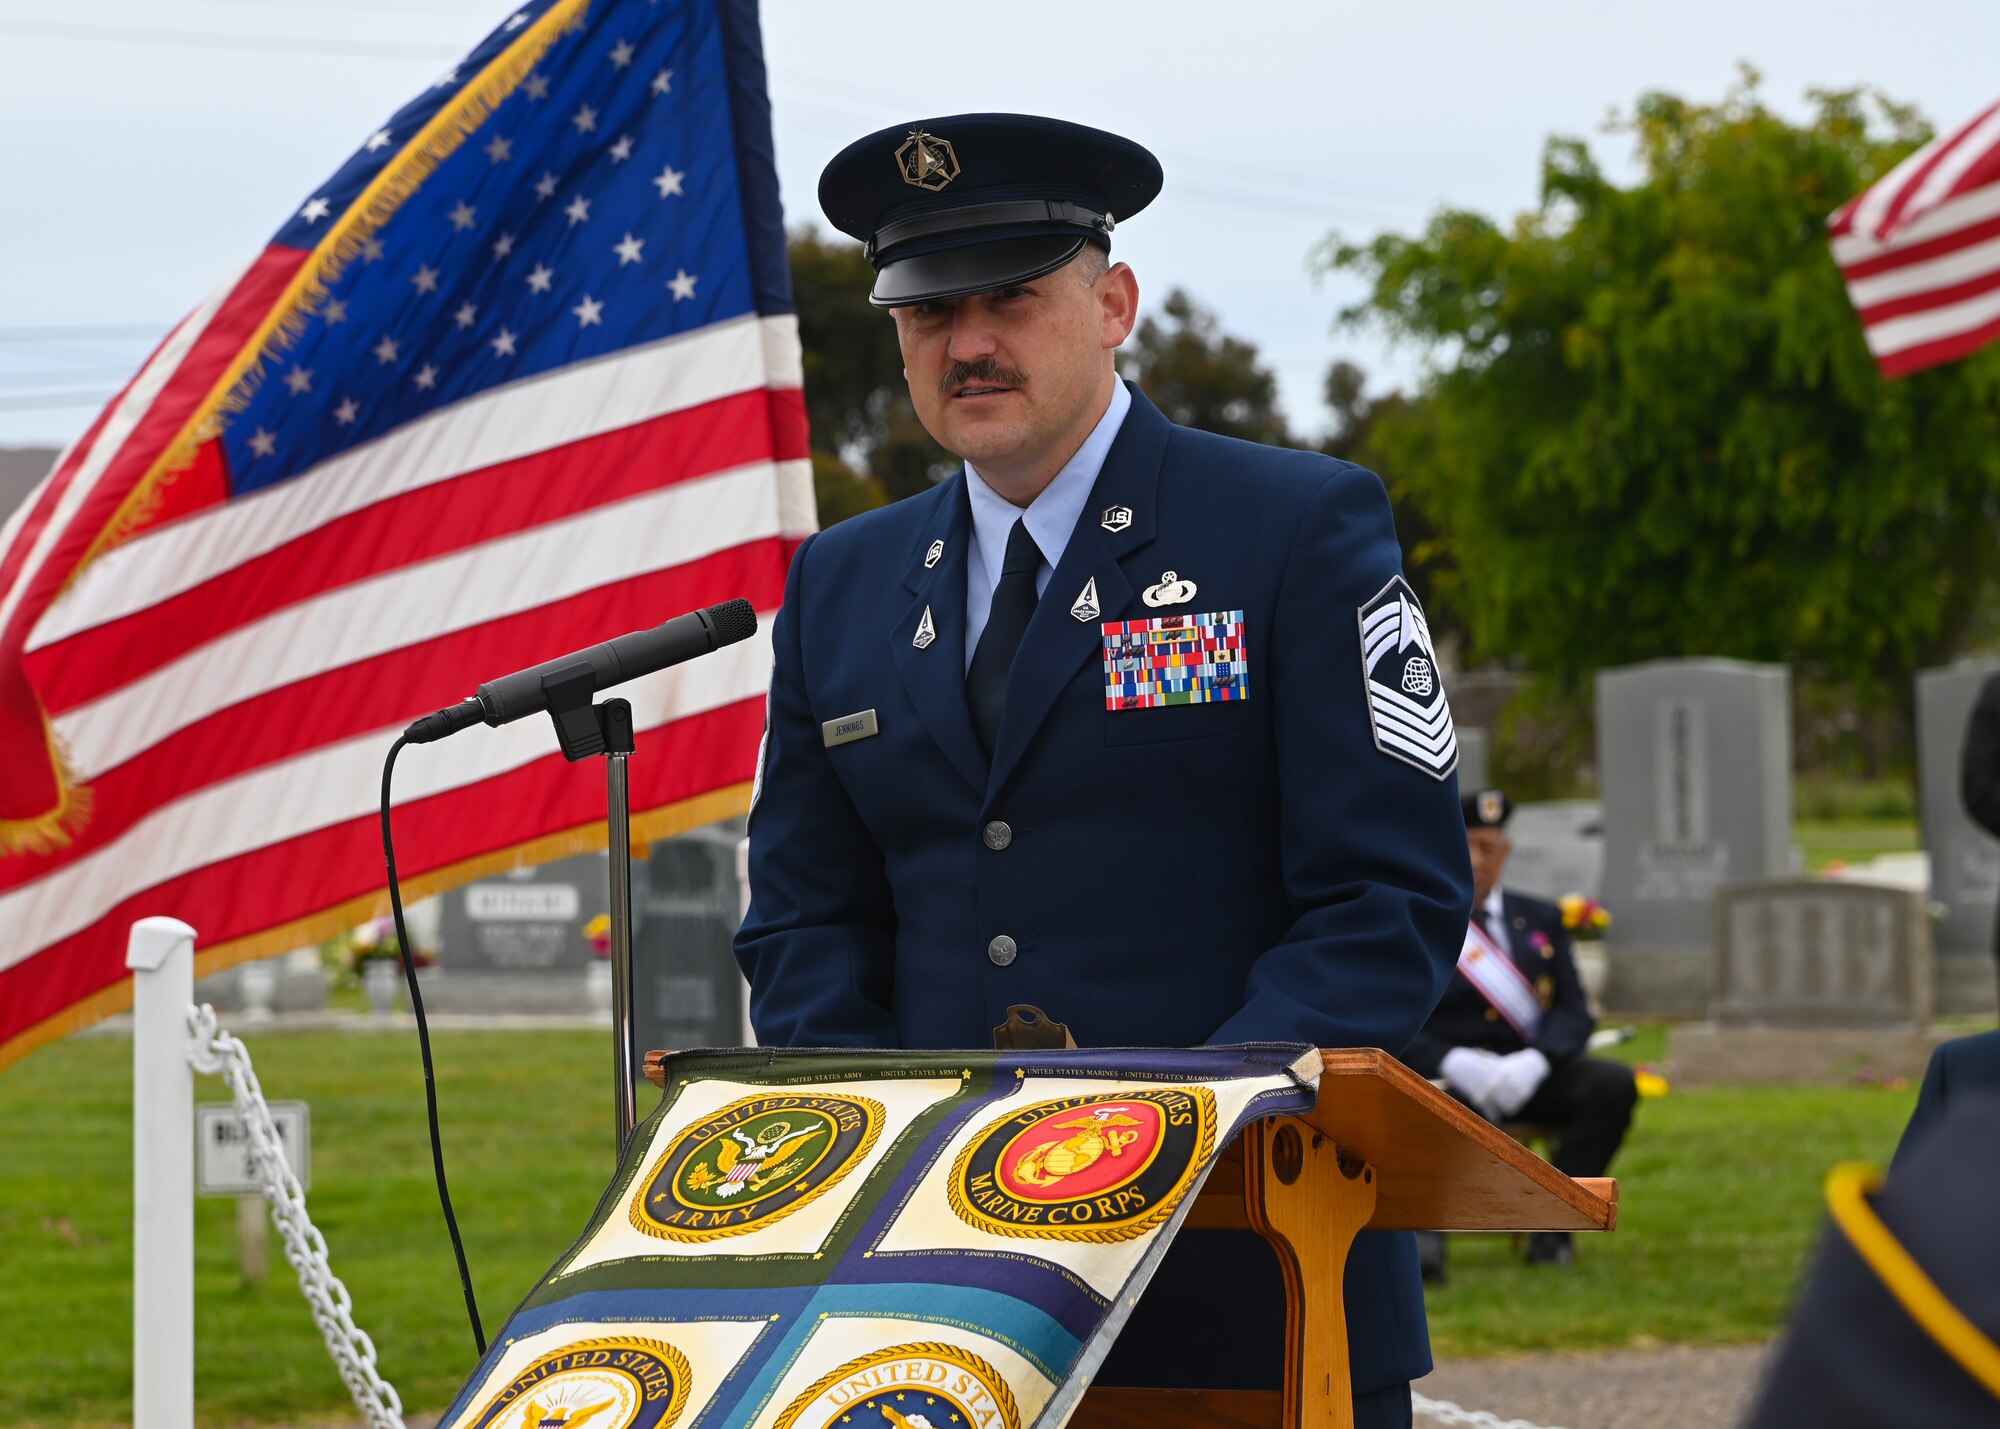 U.S. Space Force Chief Master Sgt. Heath Jennings, Space Launch Delta 30 senior enlisted leader, gives a speech during a Memorial Day event at Guadalupe Cemetery in Guadalupe, Calif., May 29, 2023. Memorial Day, originally known as Decoration Day, commemorates the men and women who made the ultimate sacrifice in their service to the United States. (U.S. Space Force photo by Airman 1st Class Kadielle Shaw)